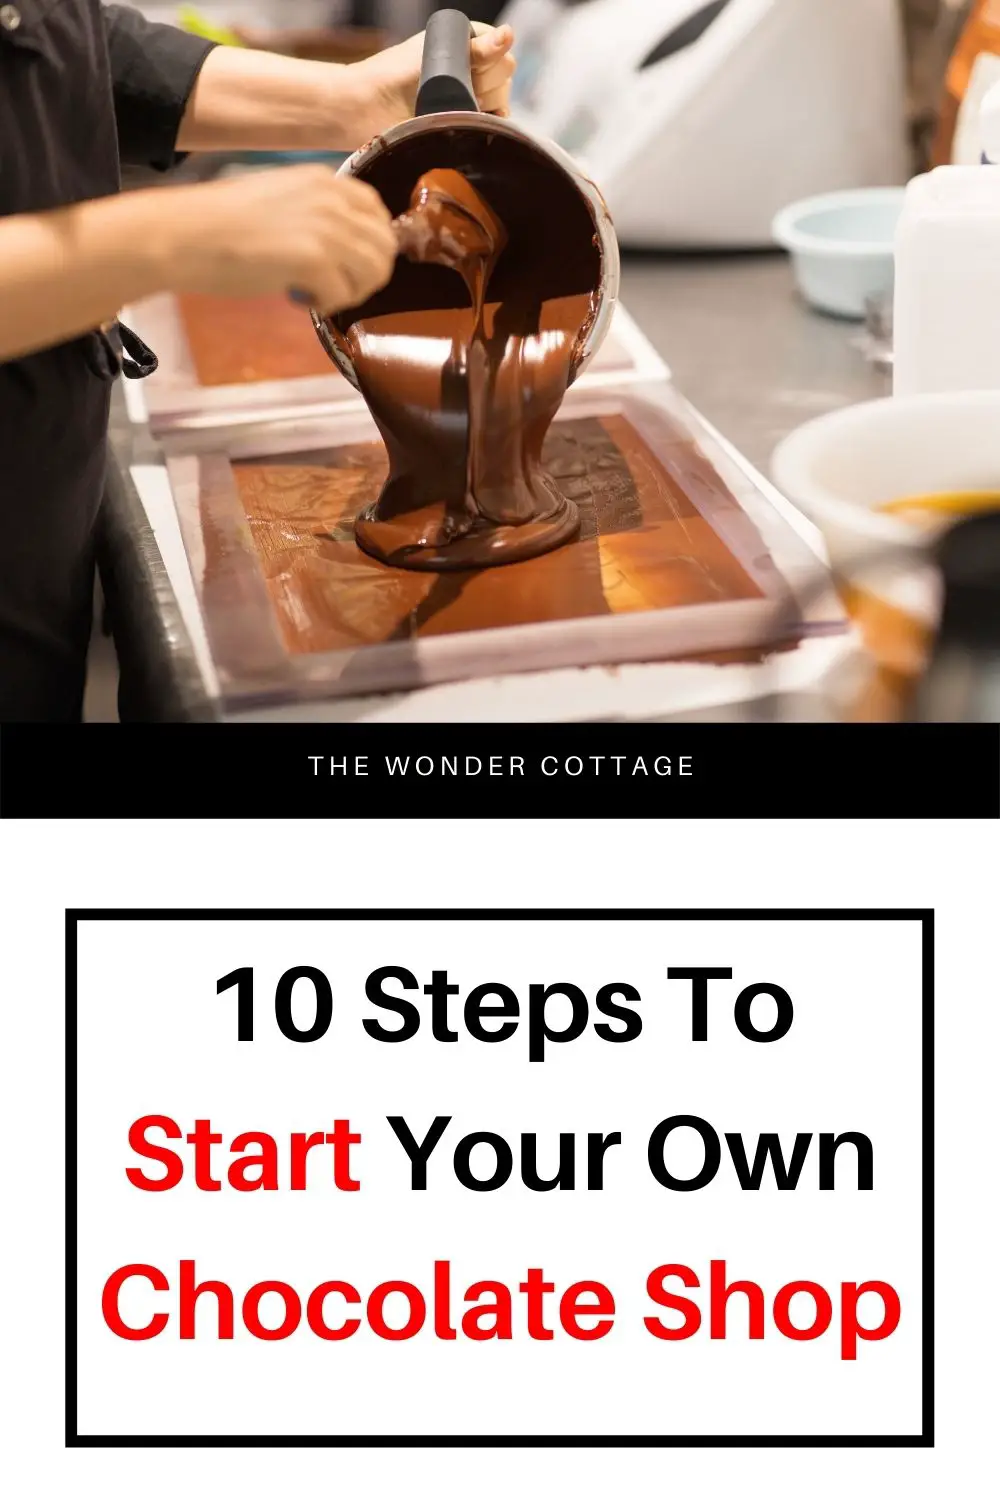 10 Steps To Start Your Own Chocolate Shop